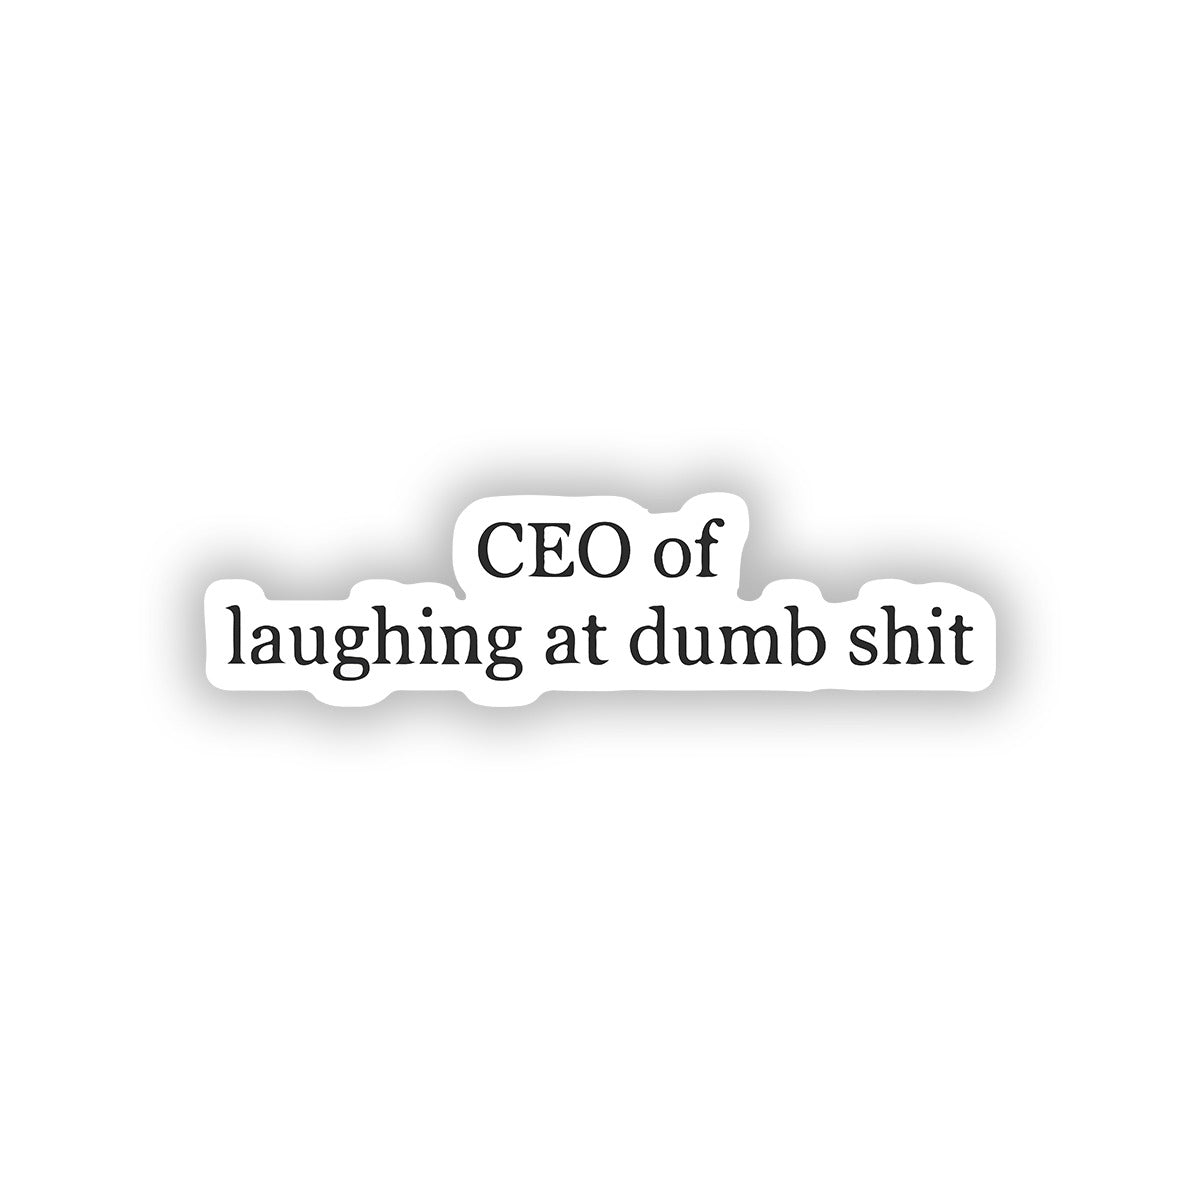 CEO of laughing at dumb shit